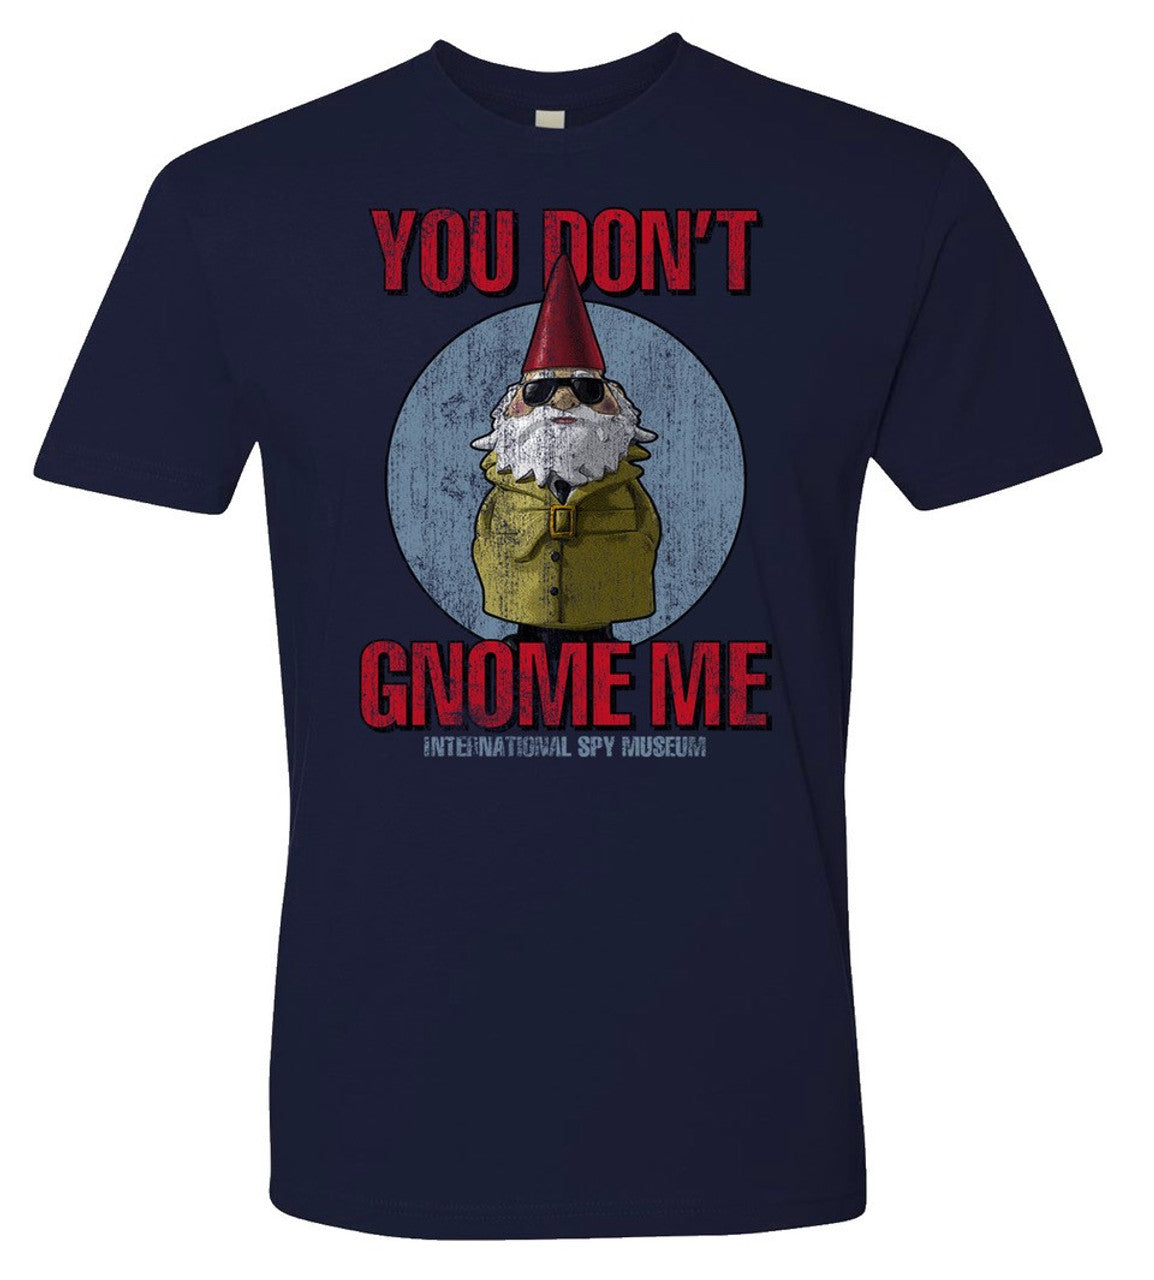 You Don't Gnome Me Tee - Unisex